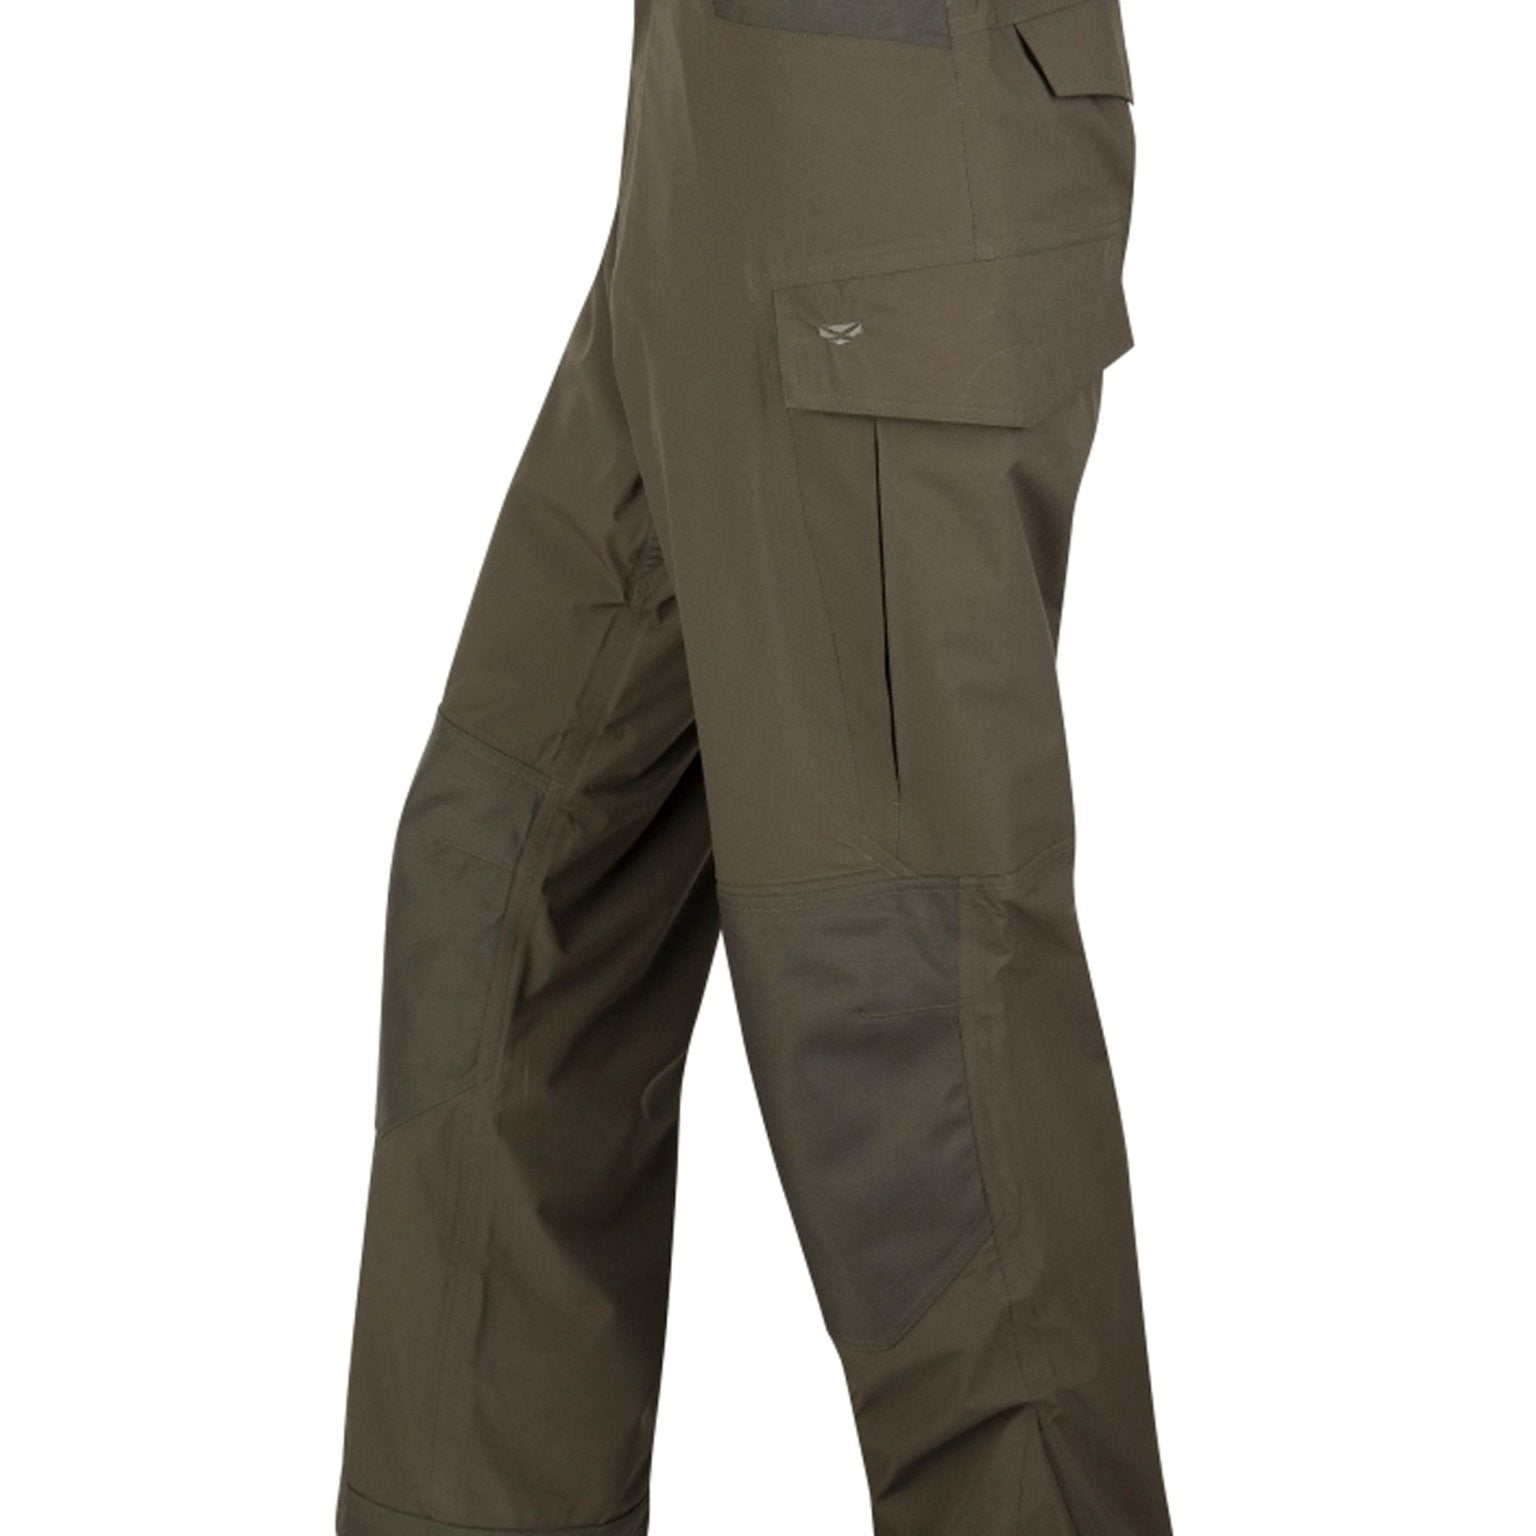 4elementsclothingHoggs of FifeHoggs of Fife - Mens Waterproof Trousers - Culloden lightweight waterproof over trouserTrousers & JeansCULT/GR/0